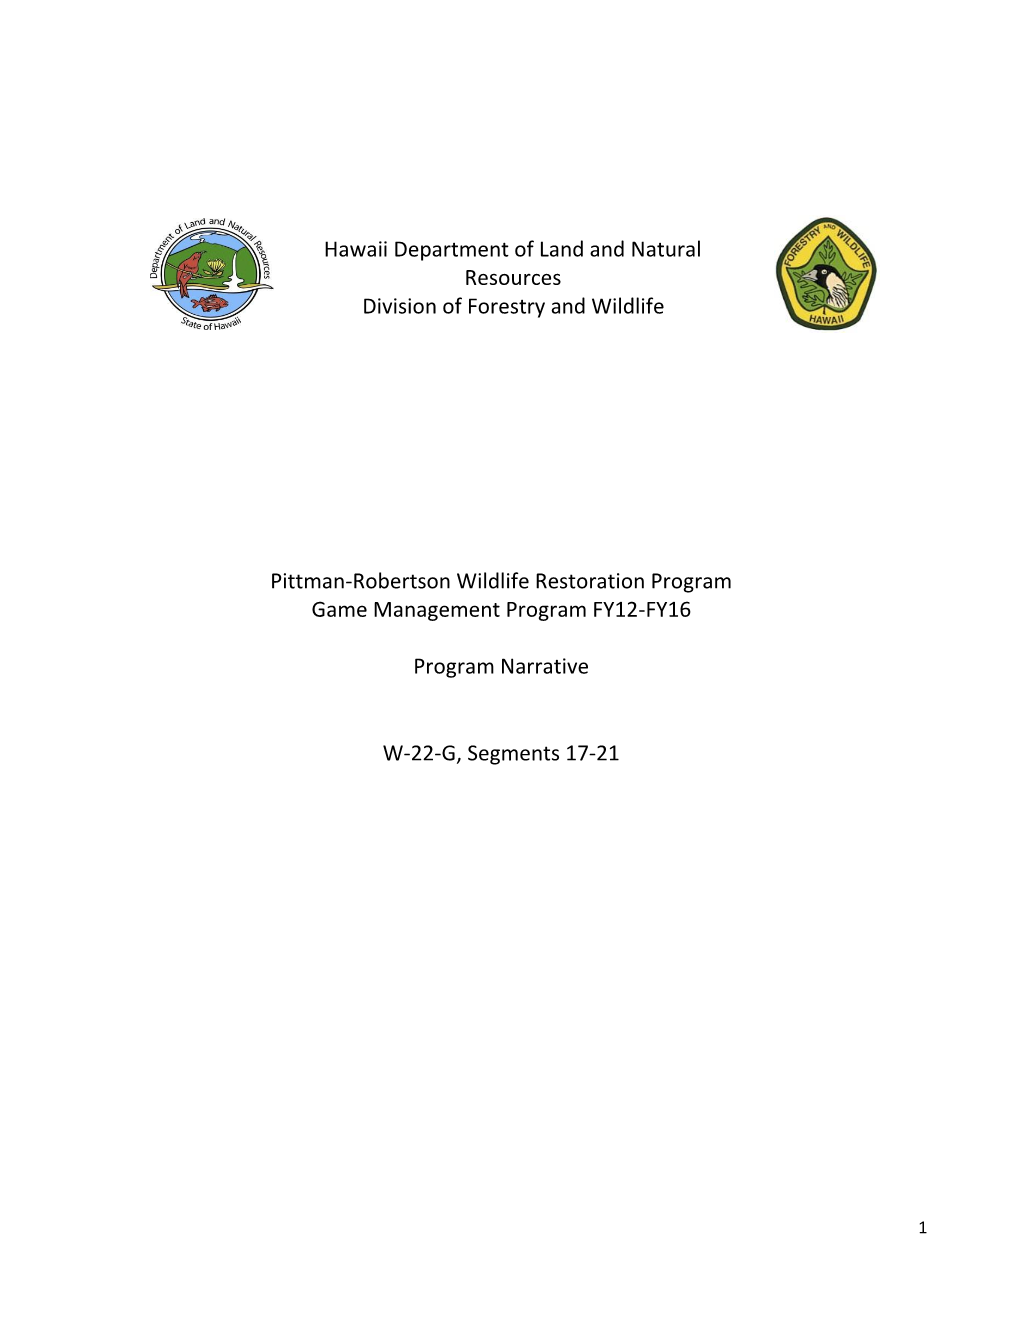 Hawaii Department of Land and Natural Resources Division of Forestry and Wildlife